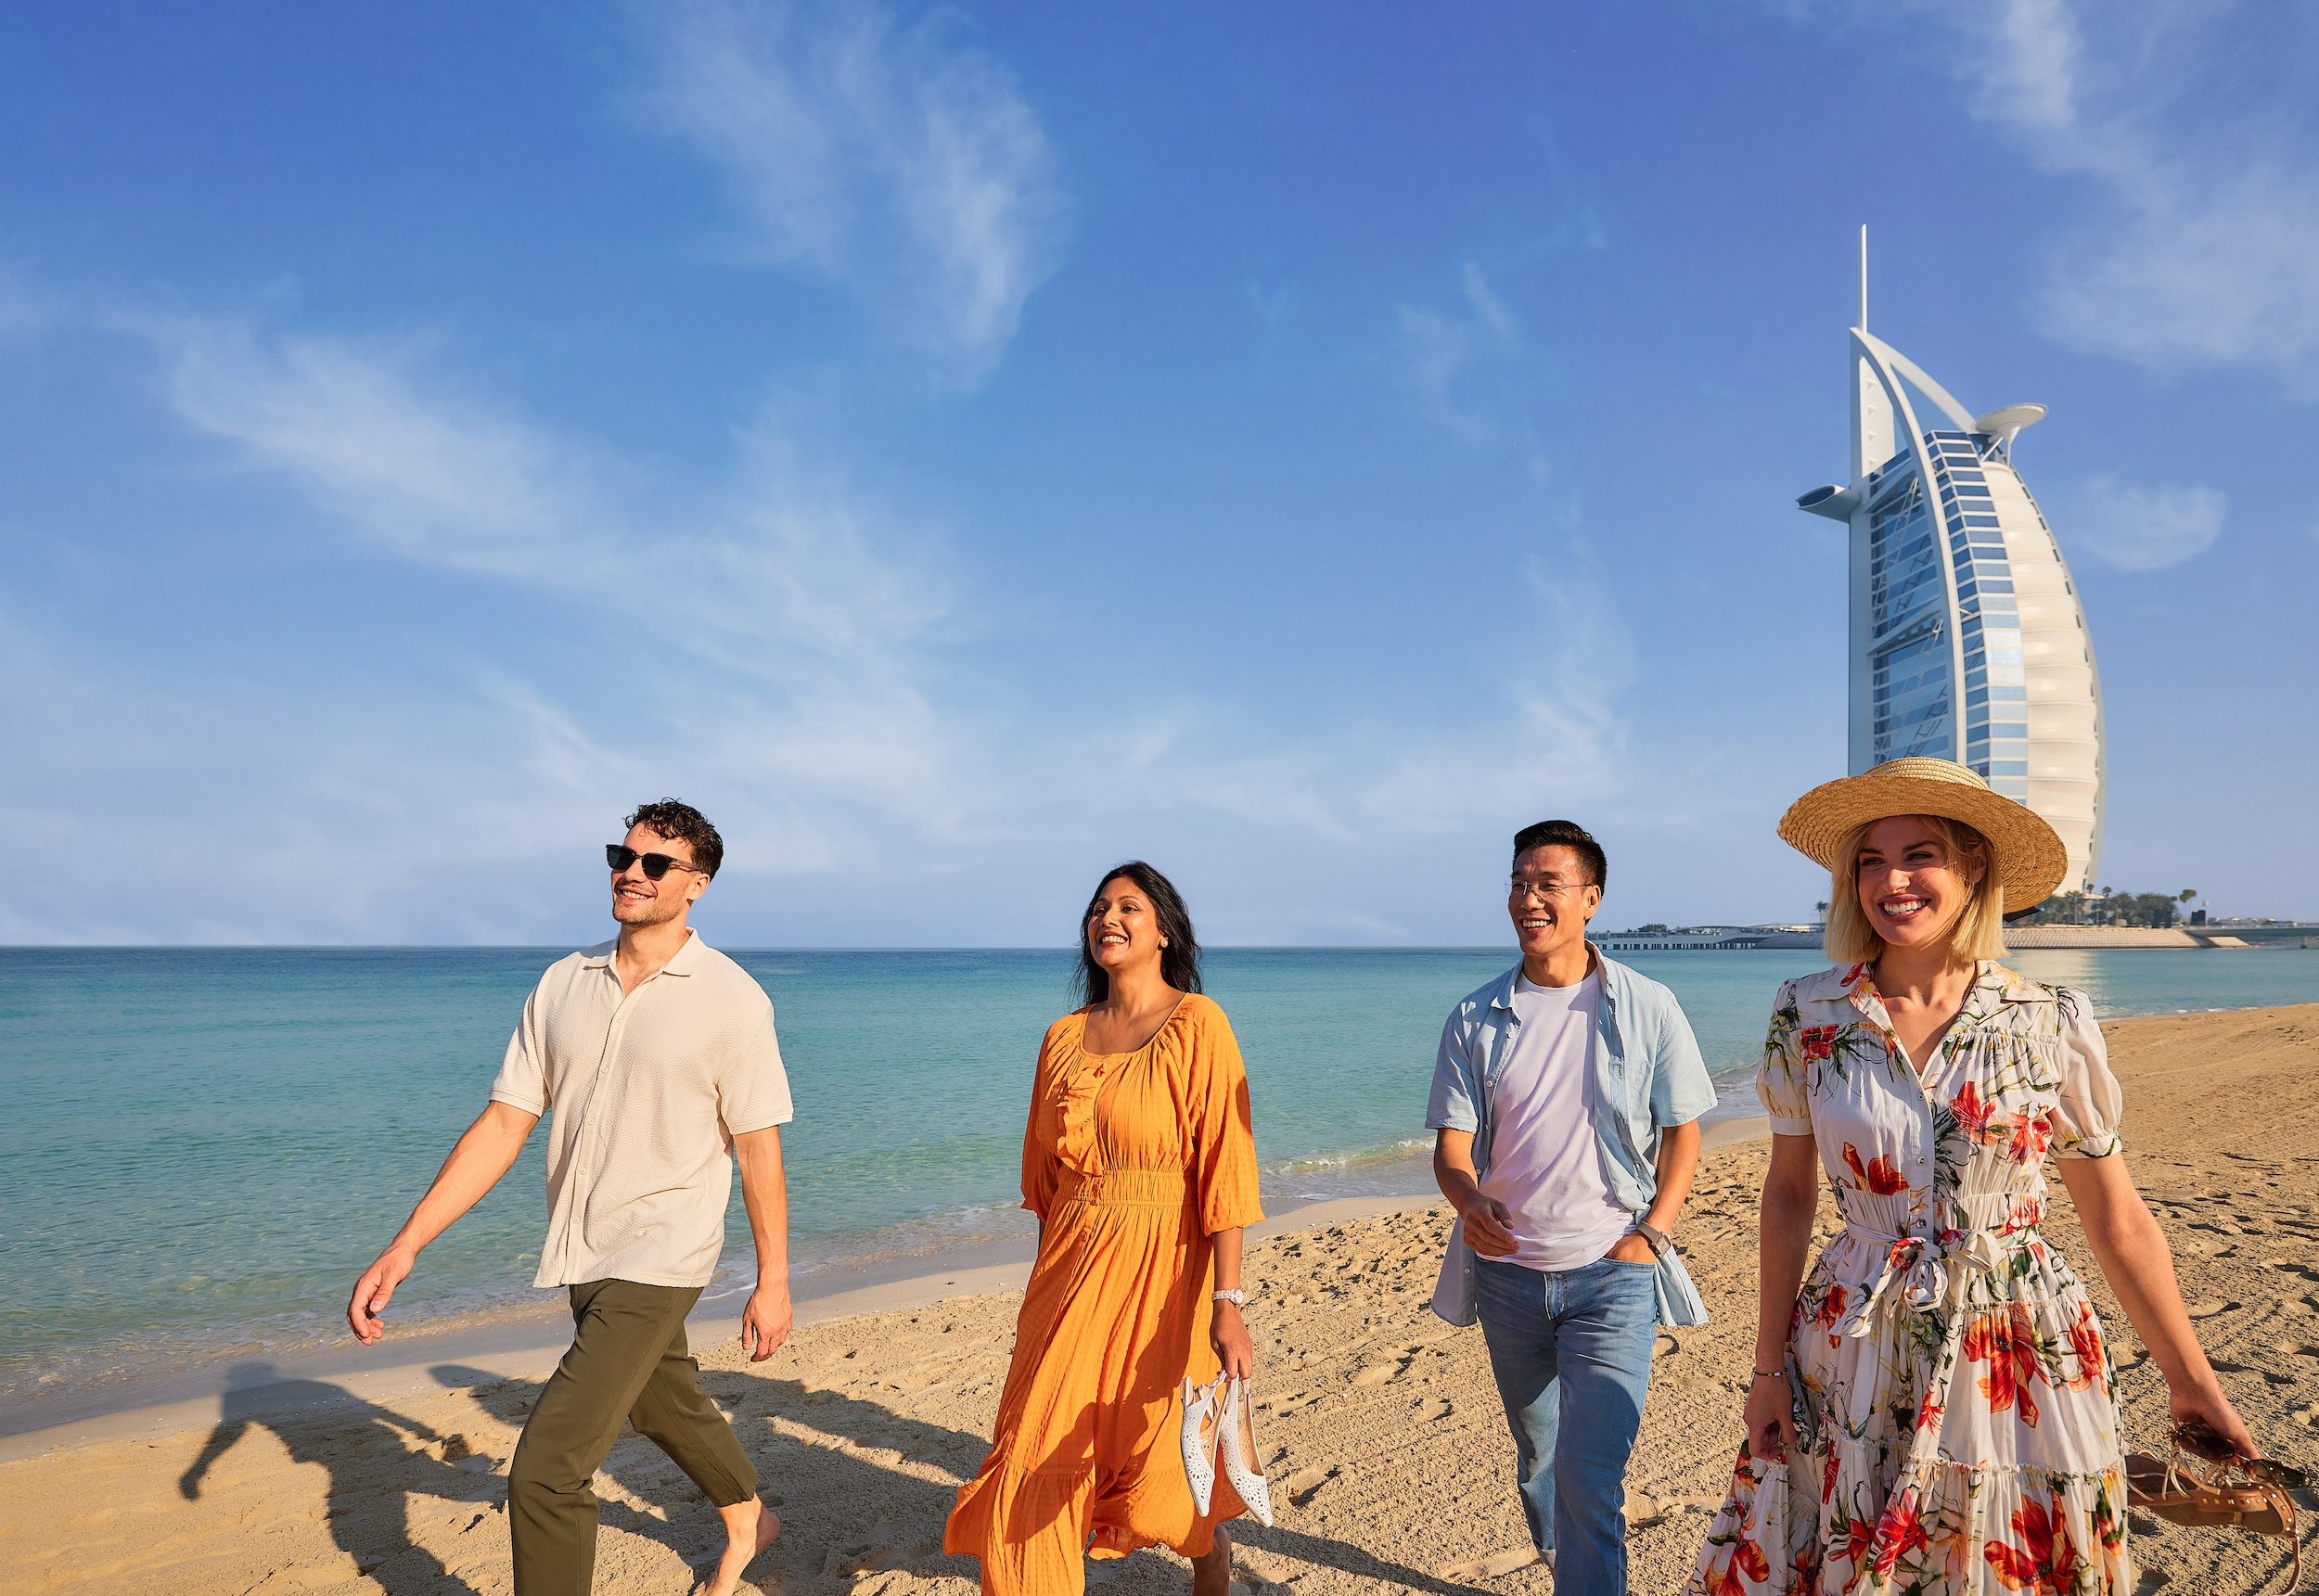 Last year, there was a 29 percent increase in international tourist arrivals to the GCC compared to 2022